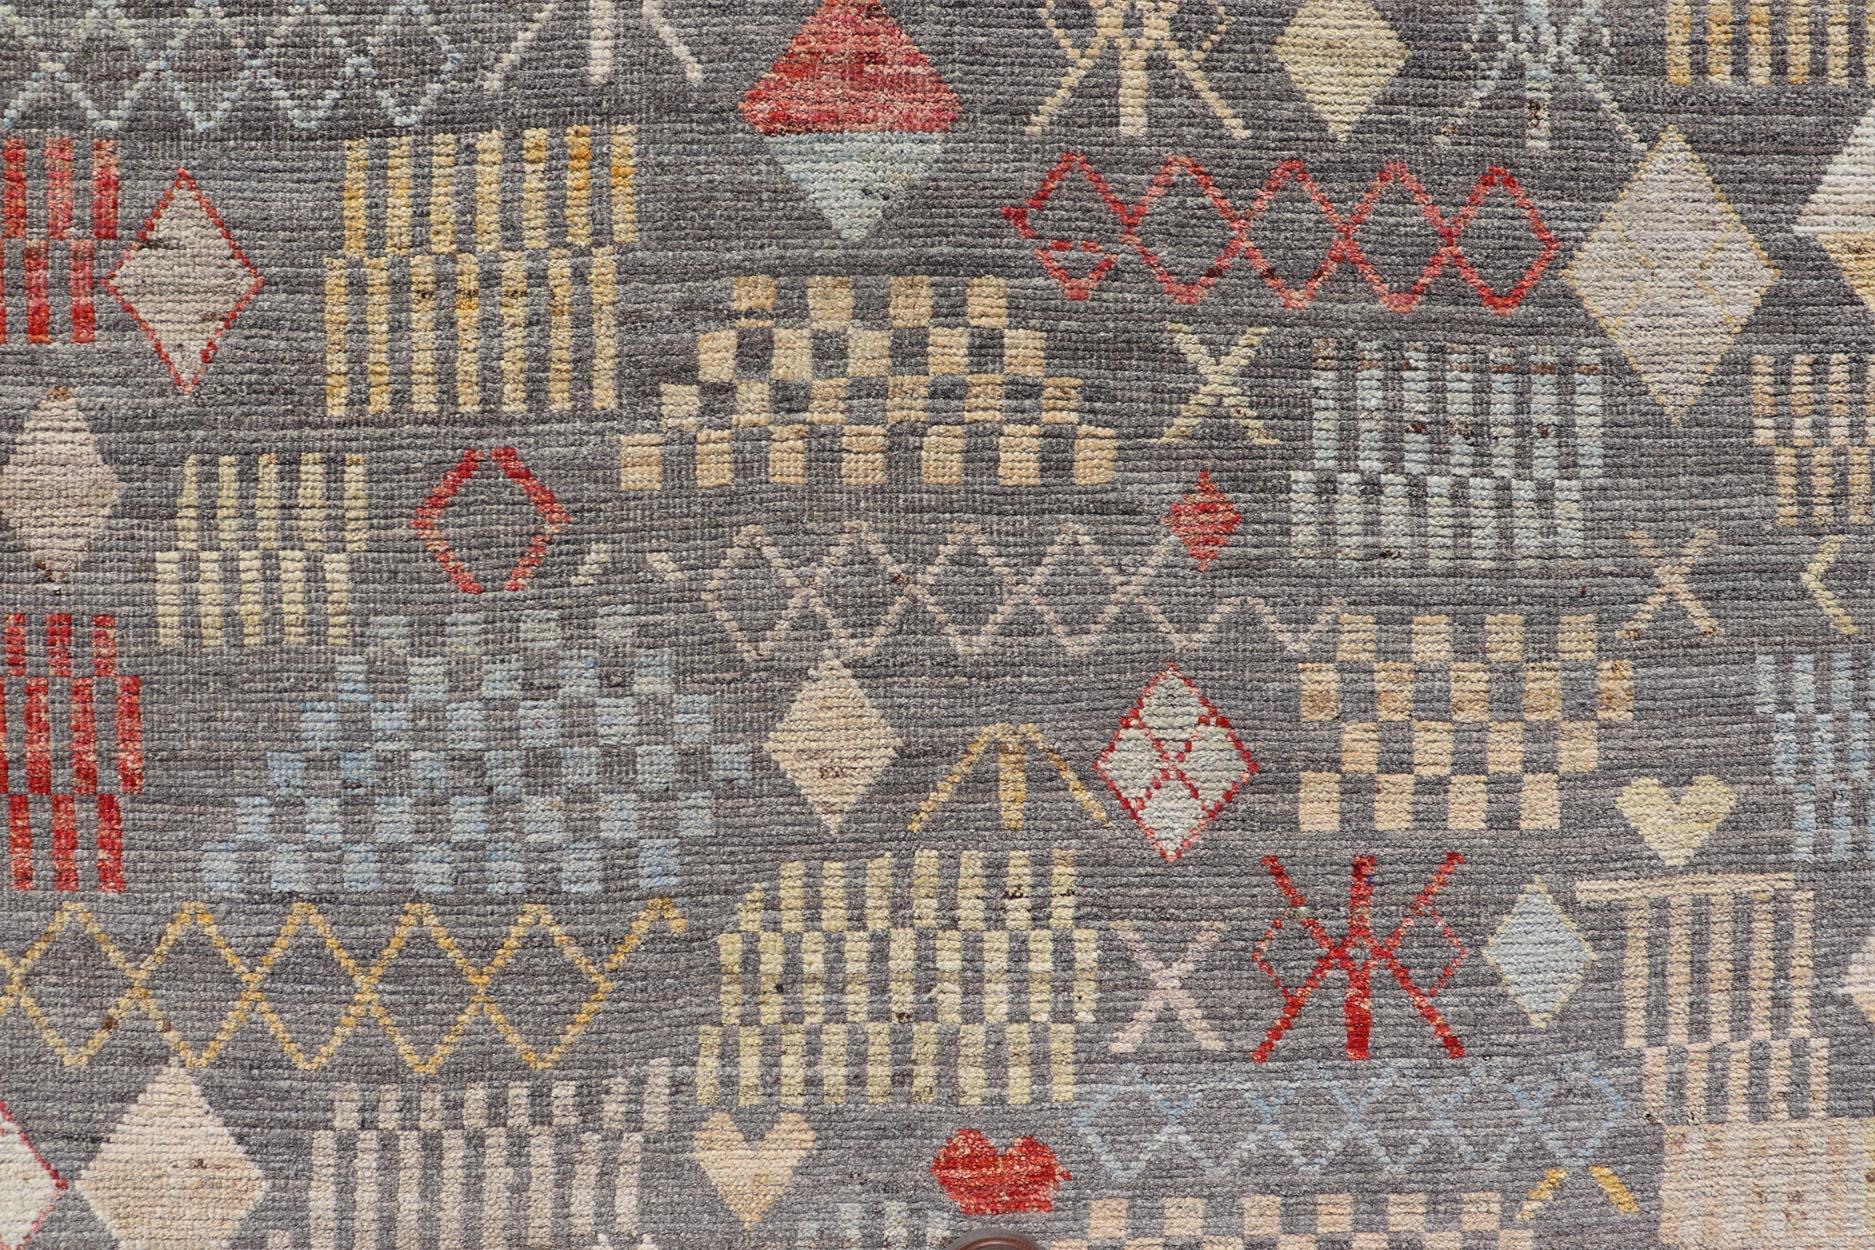 This modern casual tribal rug has been hand-knotted. The rug features a modern all-over sub-geometric design, replete with various motifs in multicolor, making this rug a superb fit for a variety of classic, modern, casual and minimalist